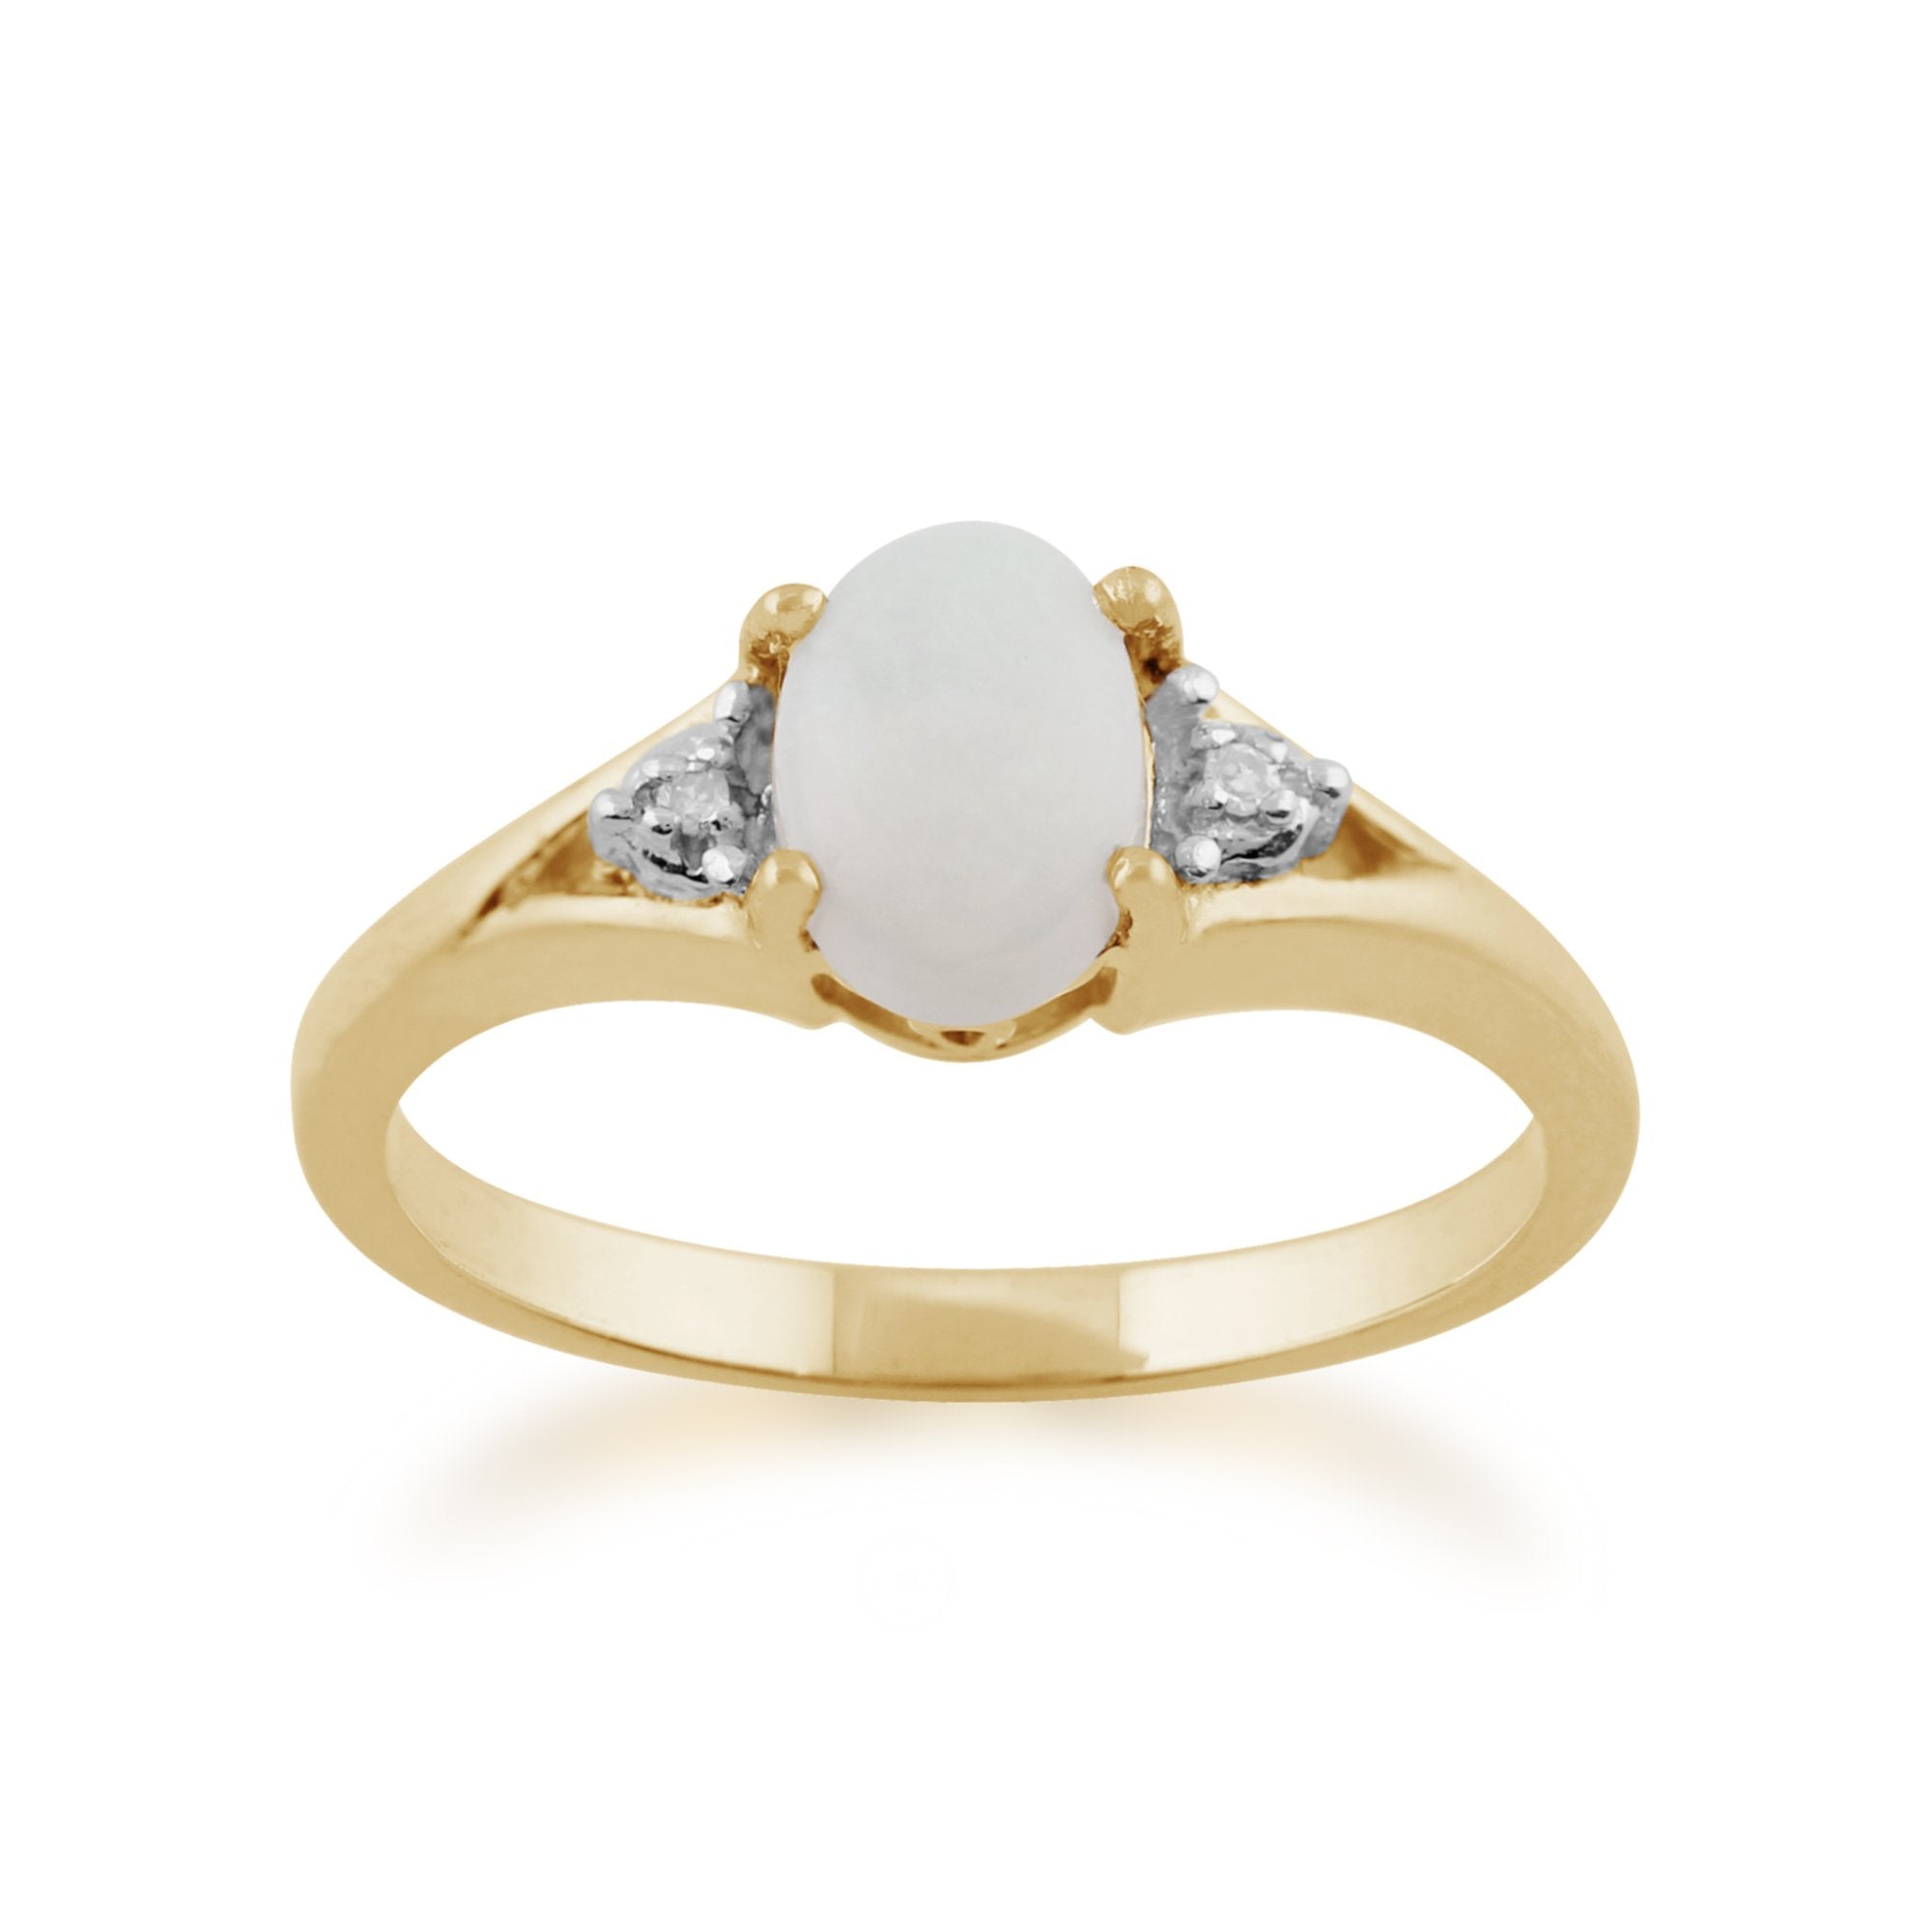 Opal & Diamond Ring in 9ct Gold